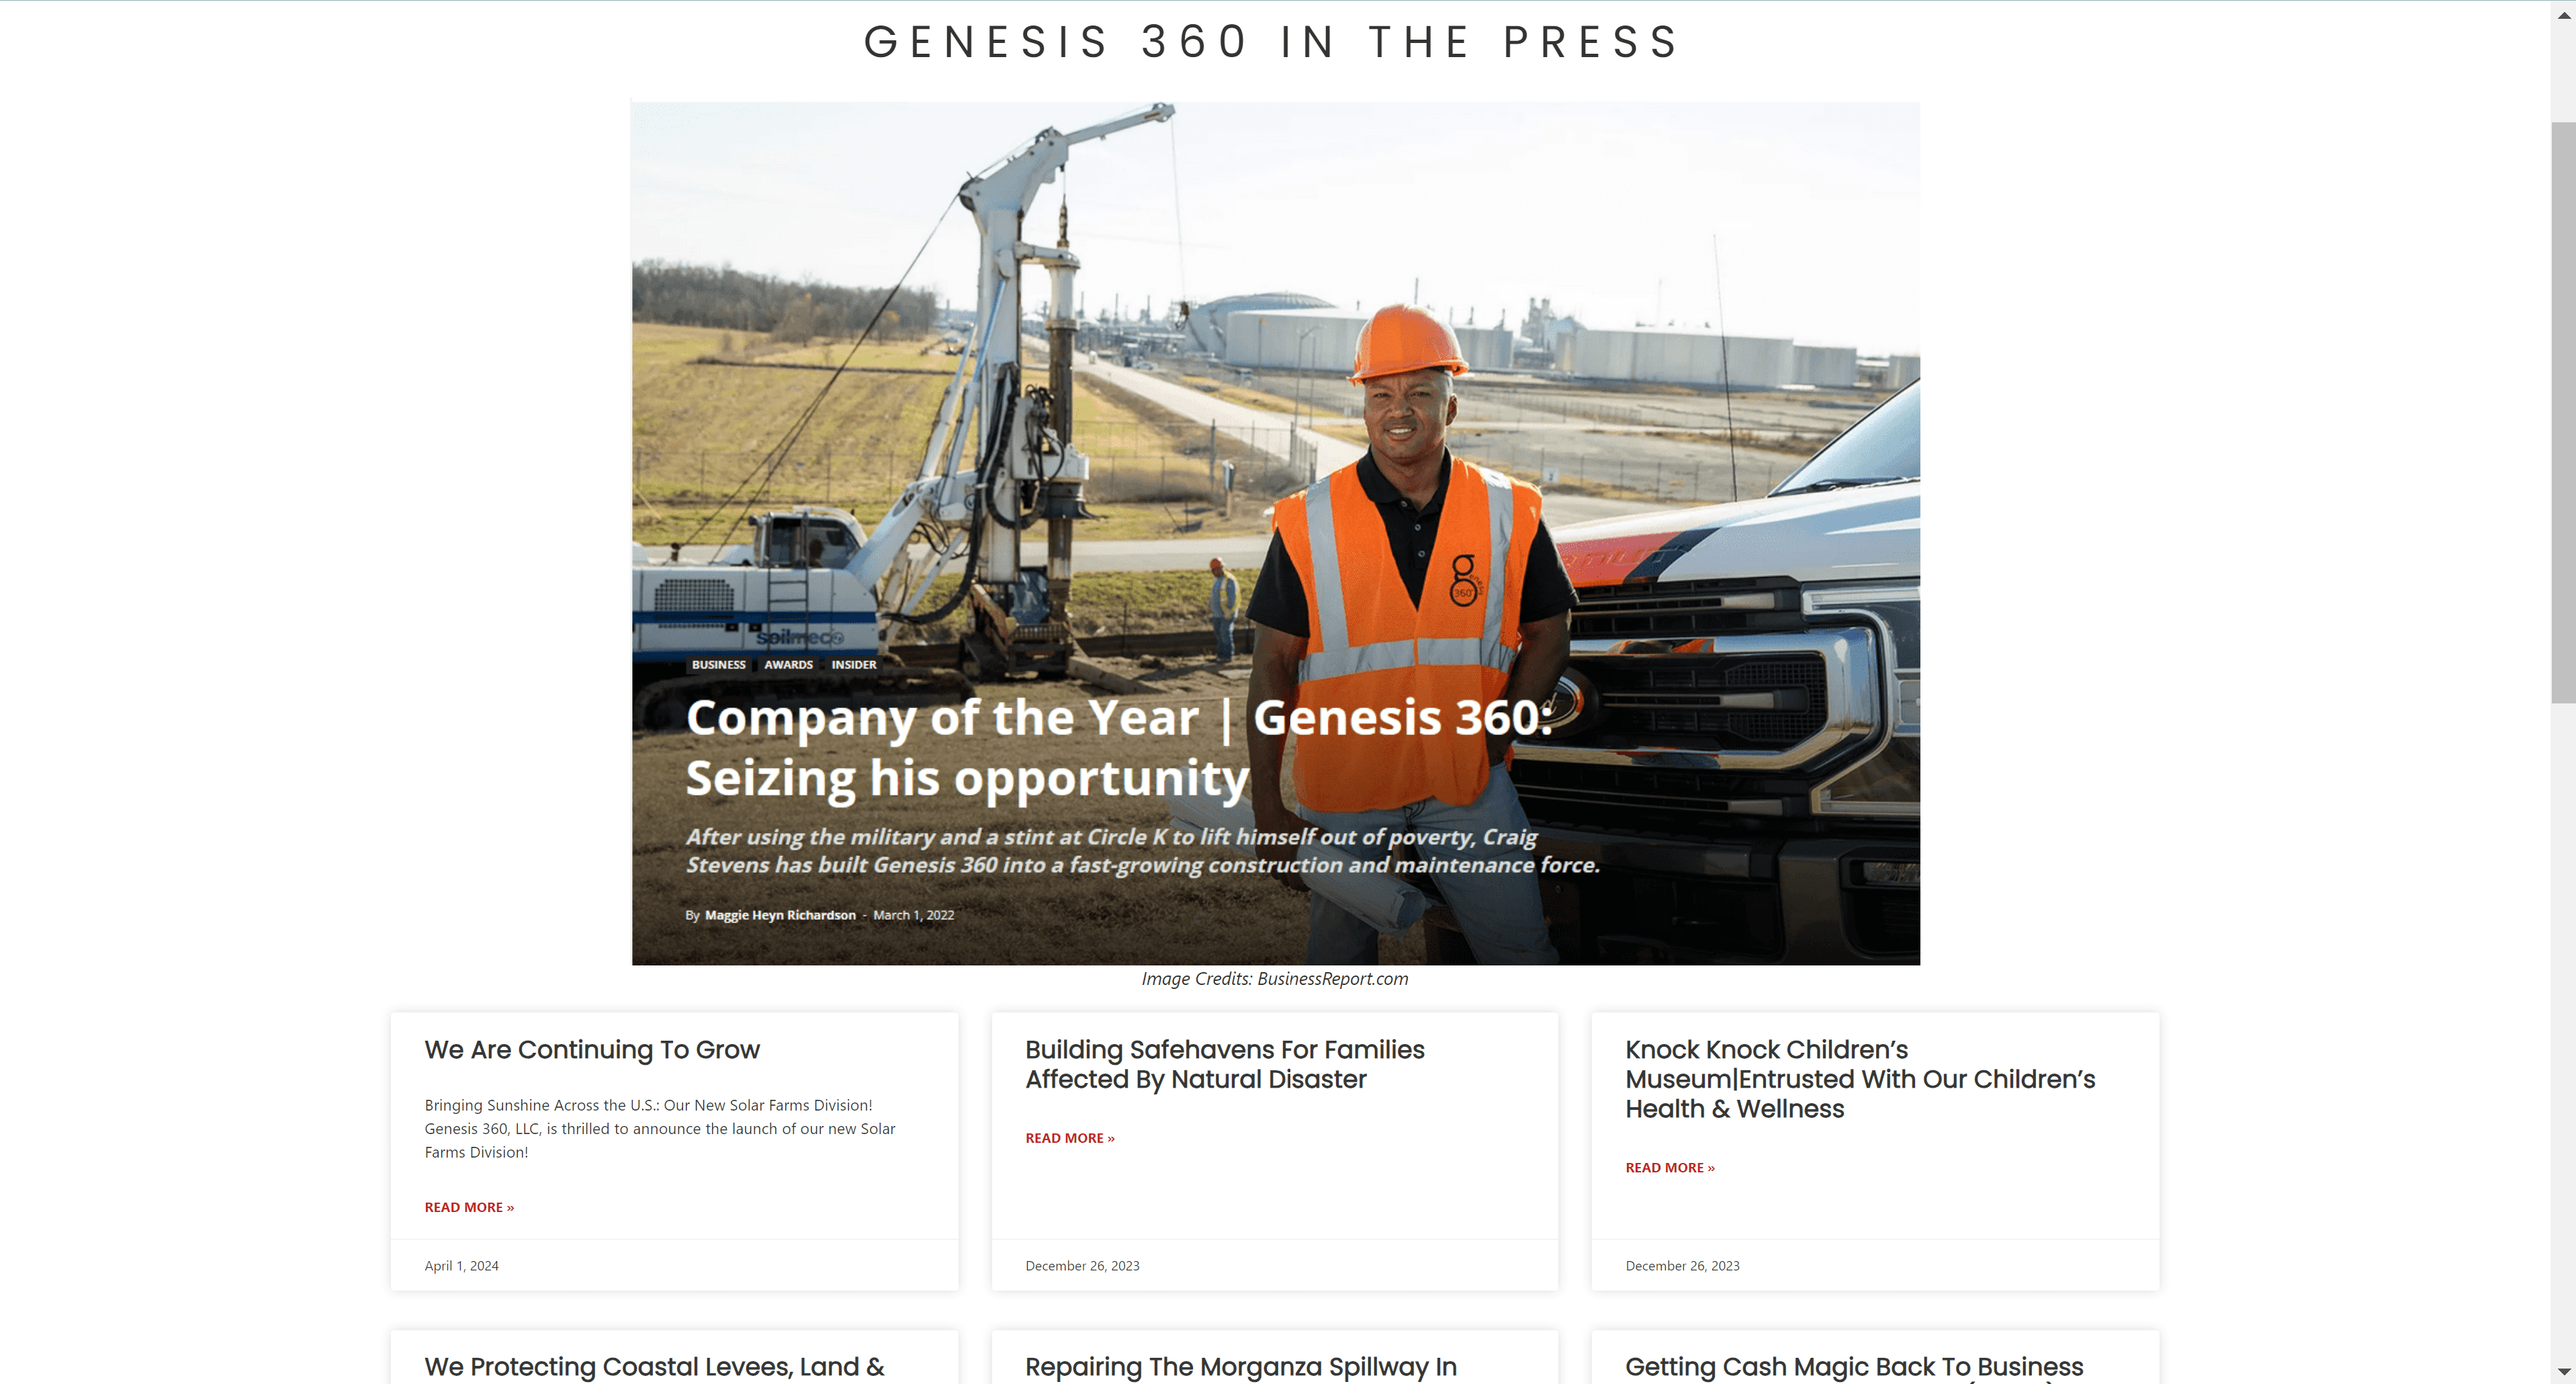 This blog pages is a repository of Genesis 360 media mentions, press, and educational content to engage the construction industry audience and encourage inquiries and improve sales.